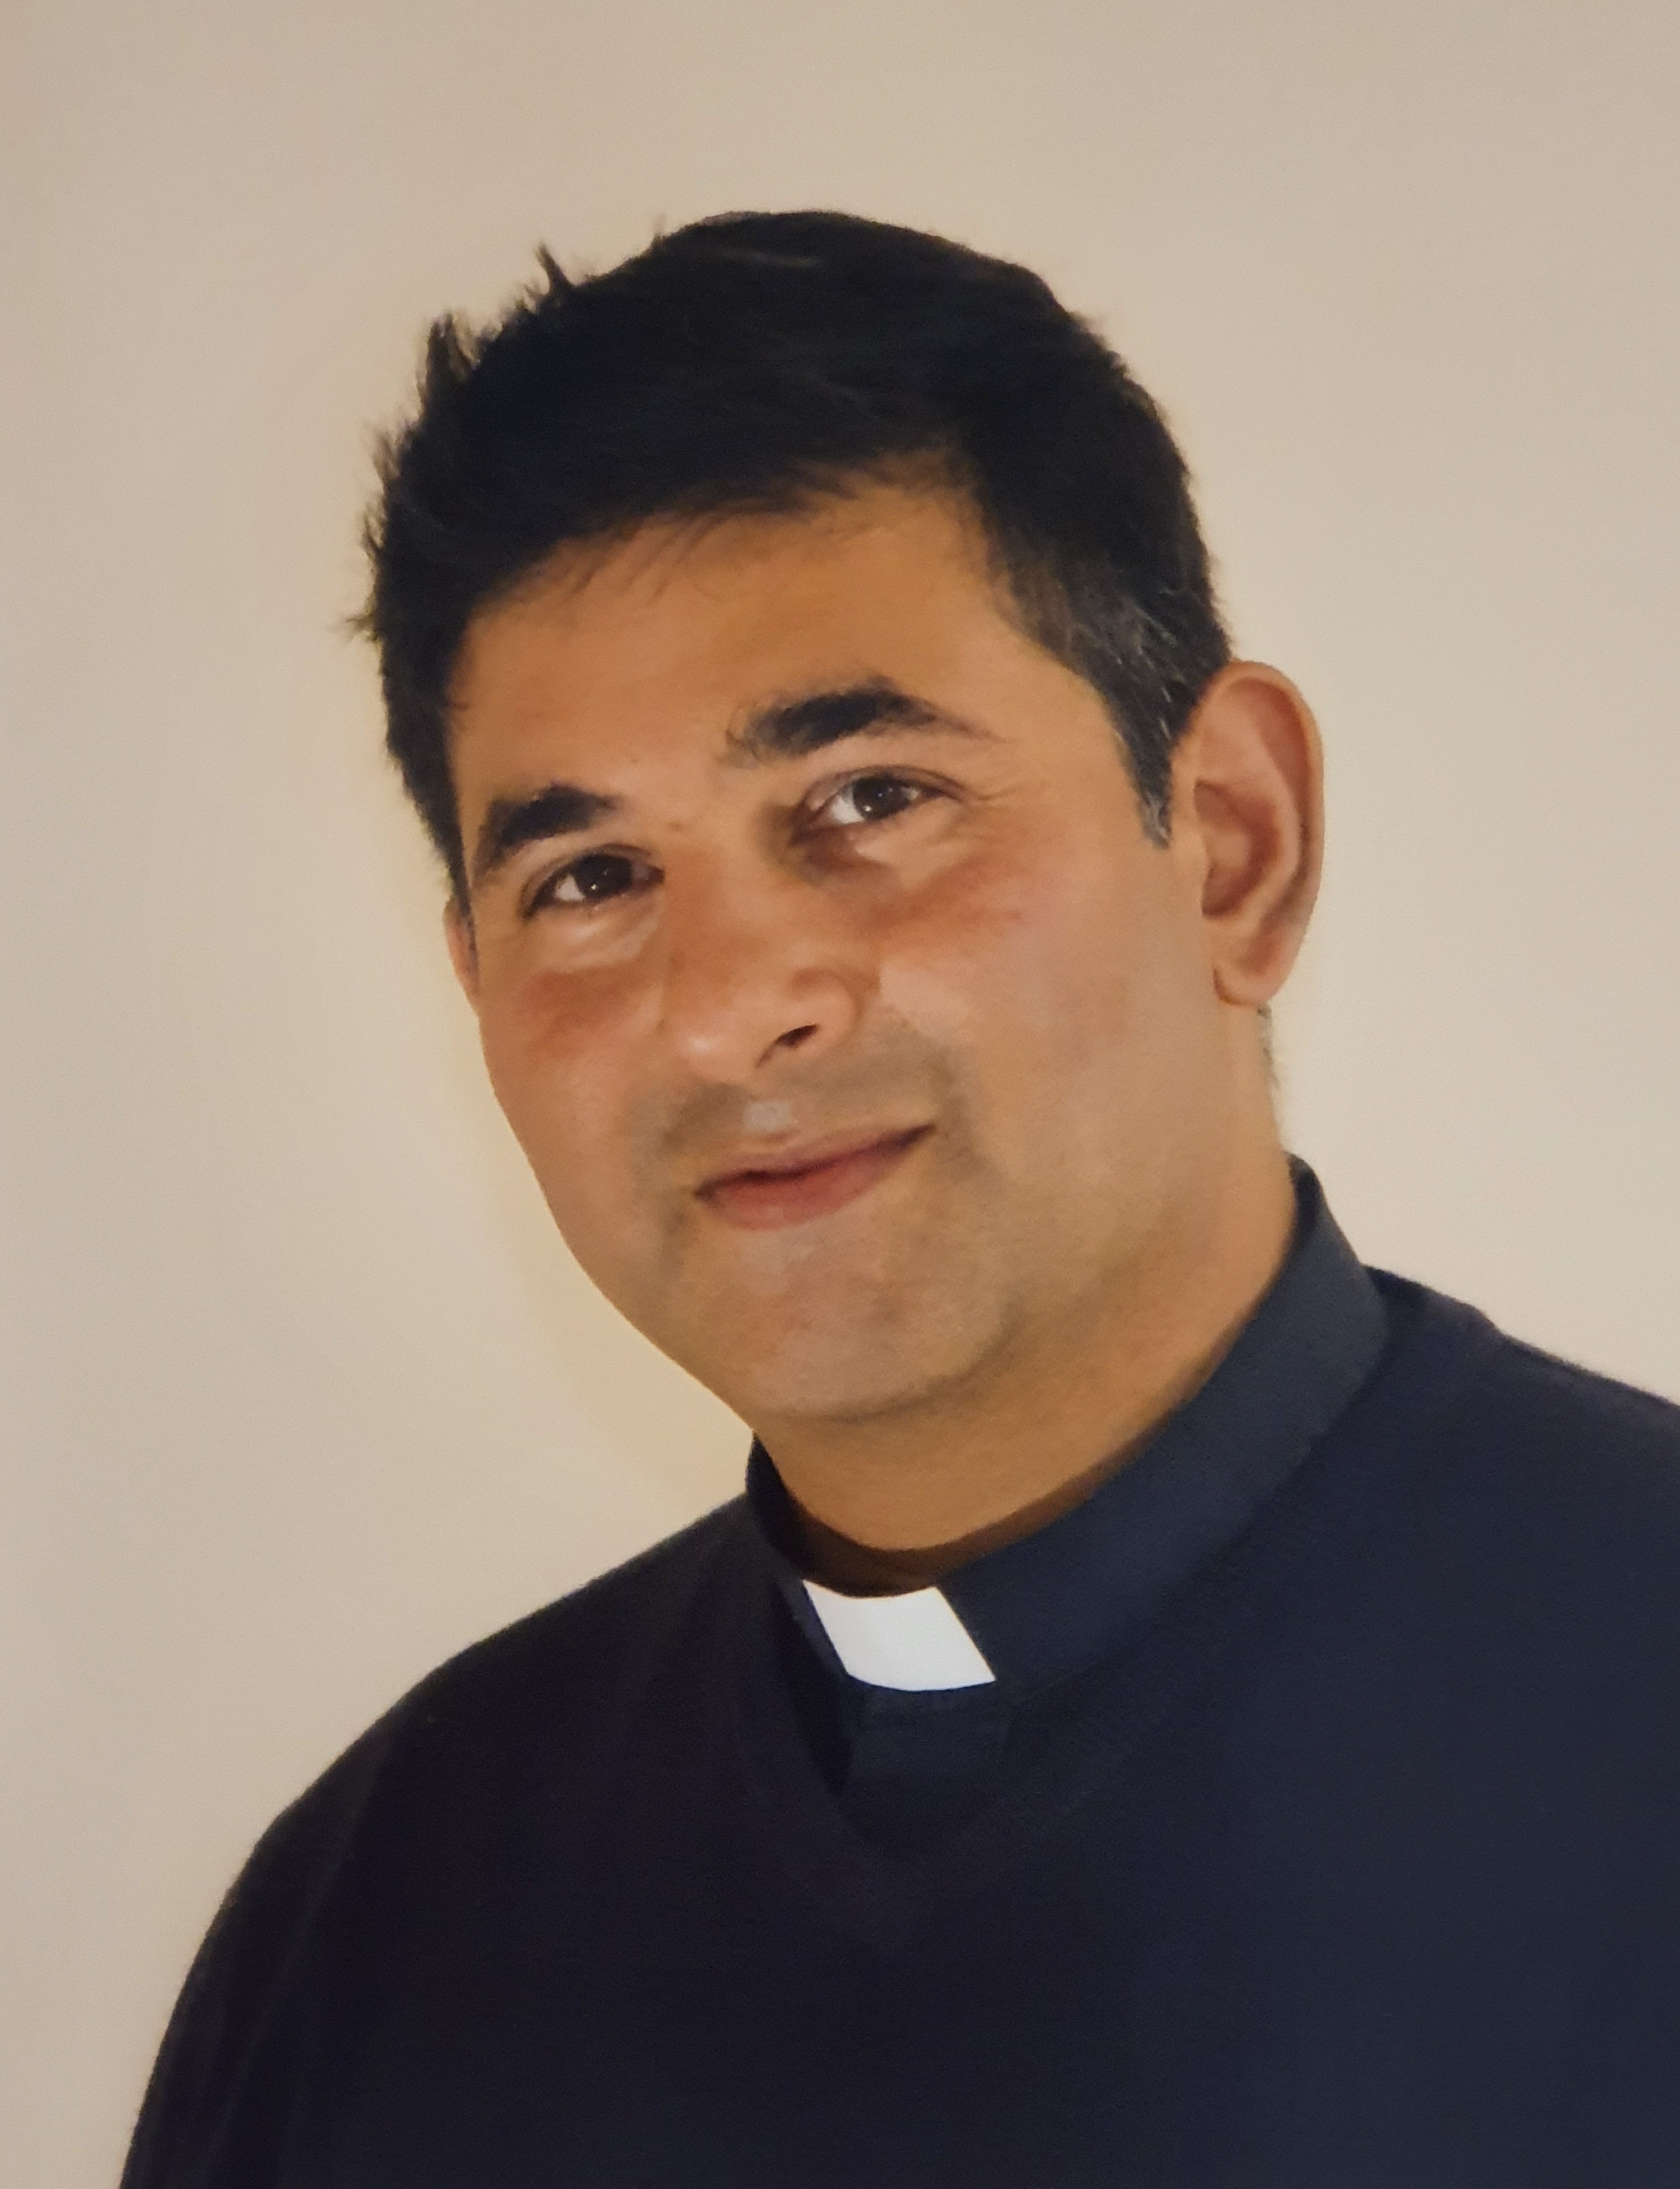 Reverend Alwyn Pereira, vicar of St Michael the Archangel Aldershot in Hampshire, says racial discrimination led to a string of unsuccessful job applications